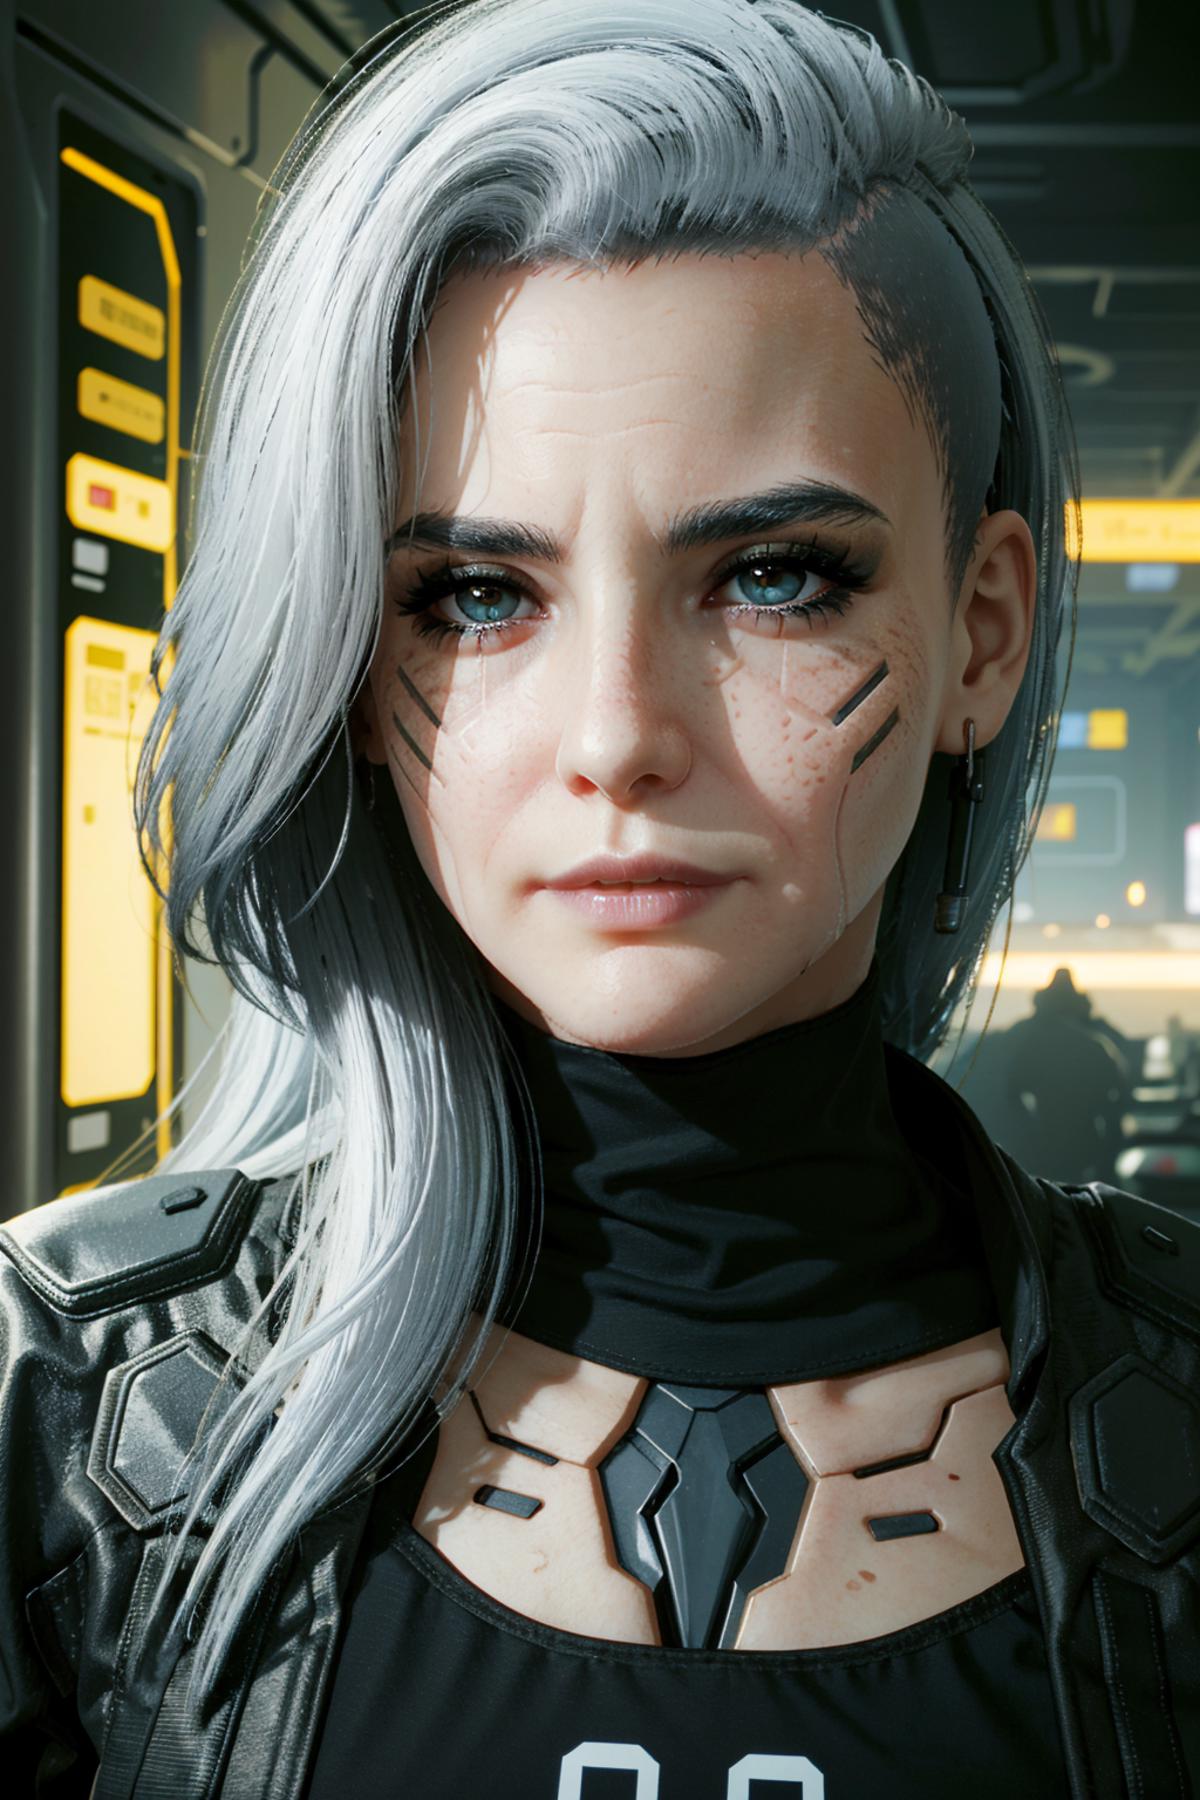 Old Rogue from Cyberpunk 2077 image by BloodRedKittie